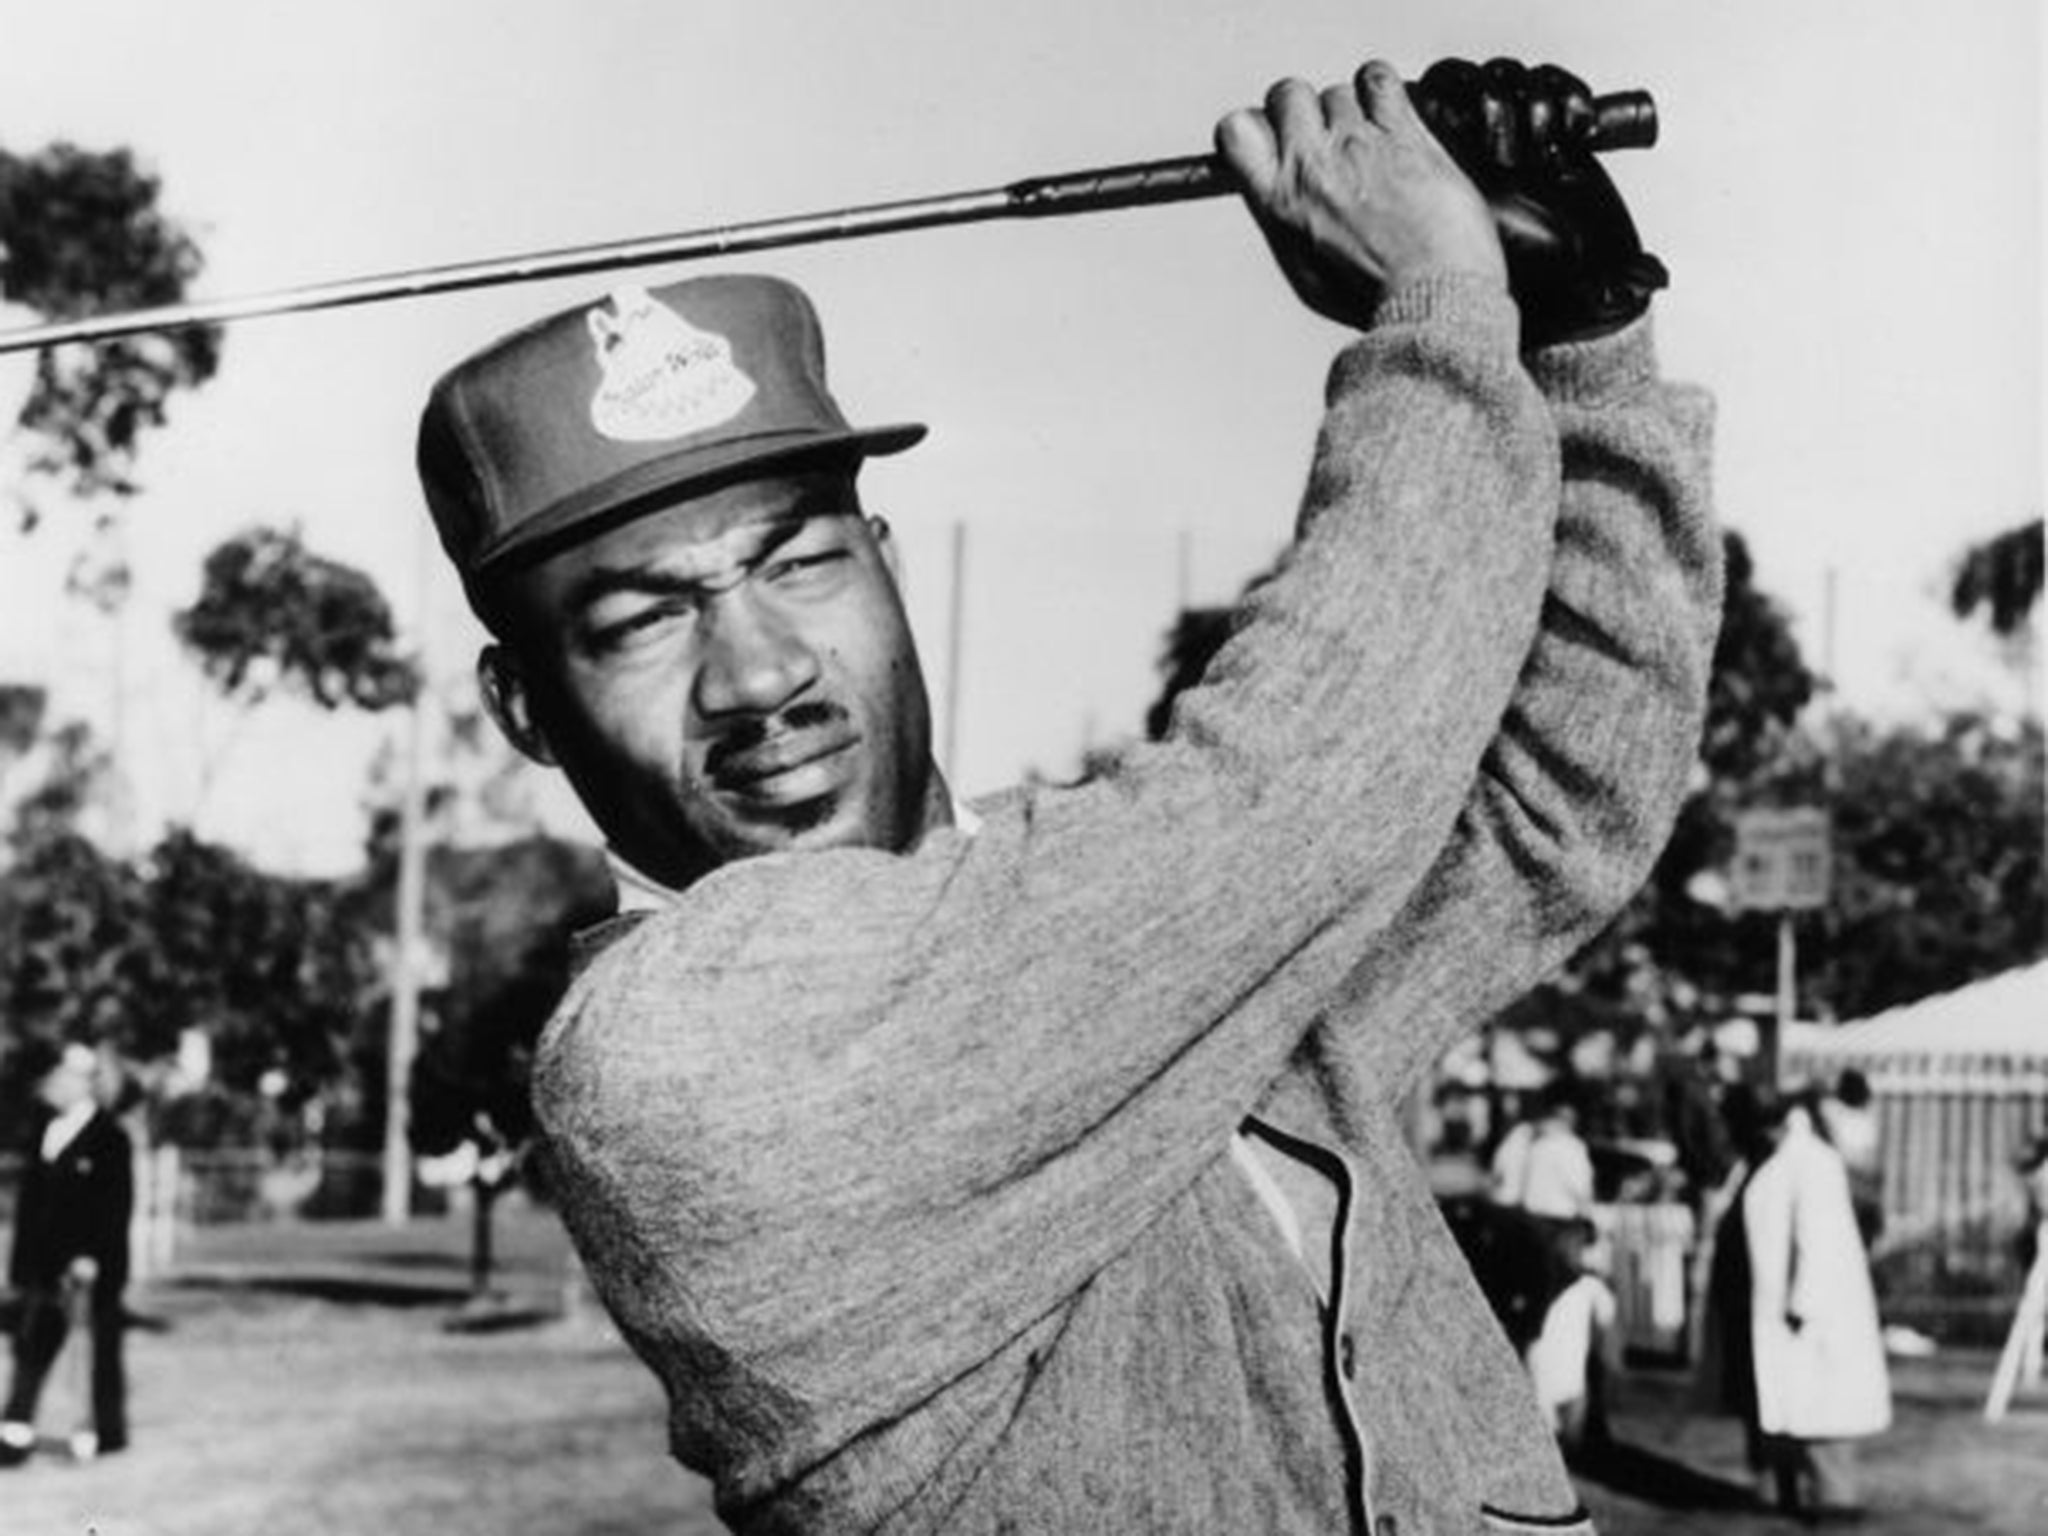 Charlie Sifford, the first black player on the PGA tour